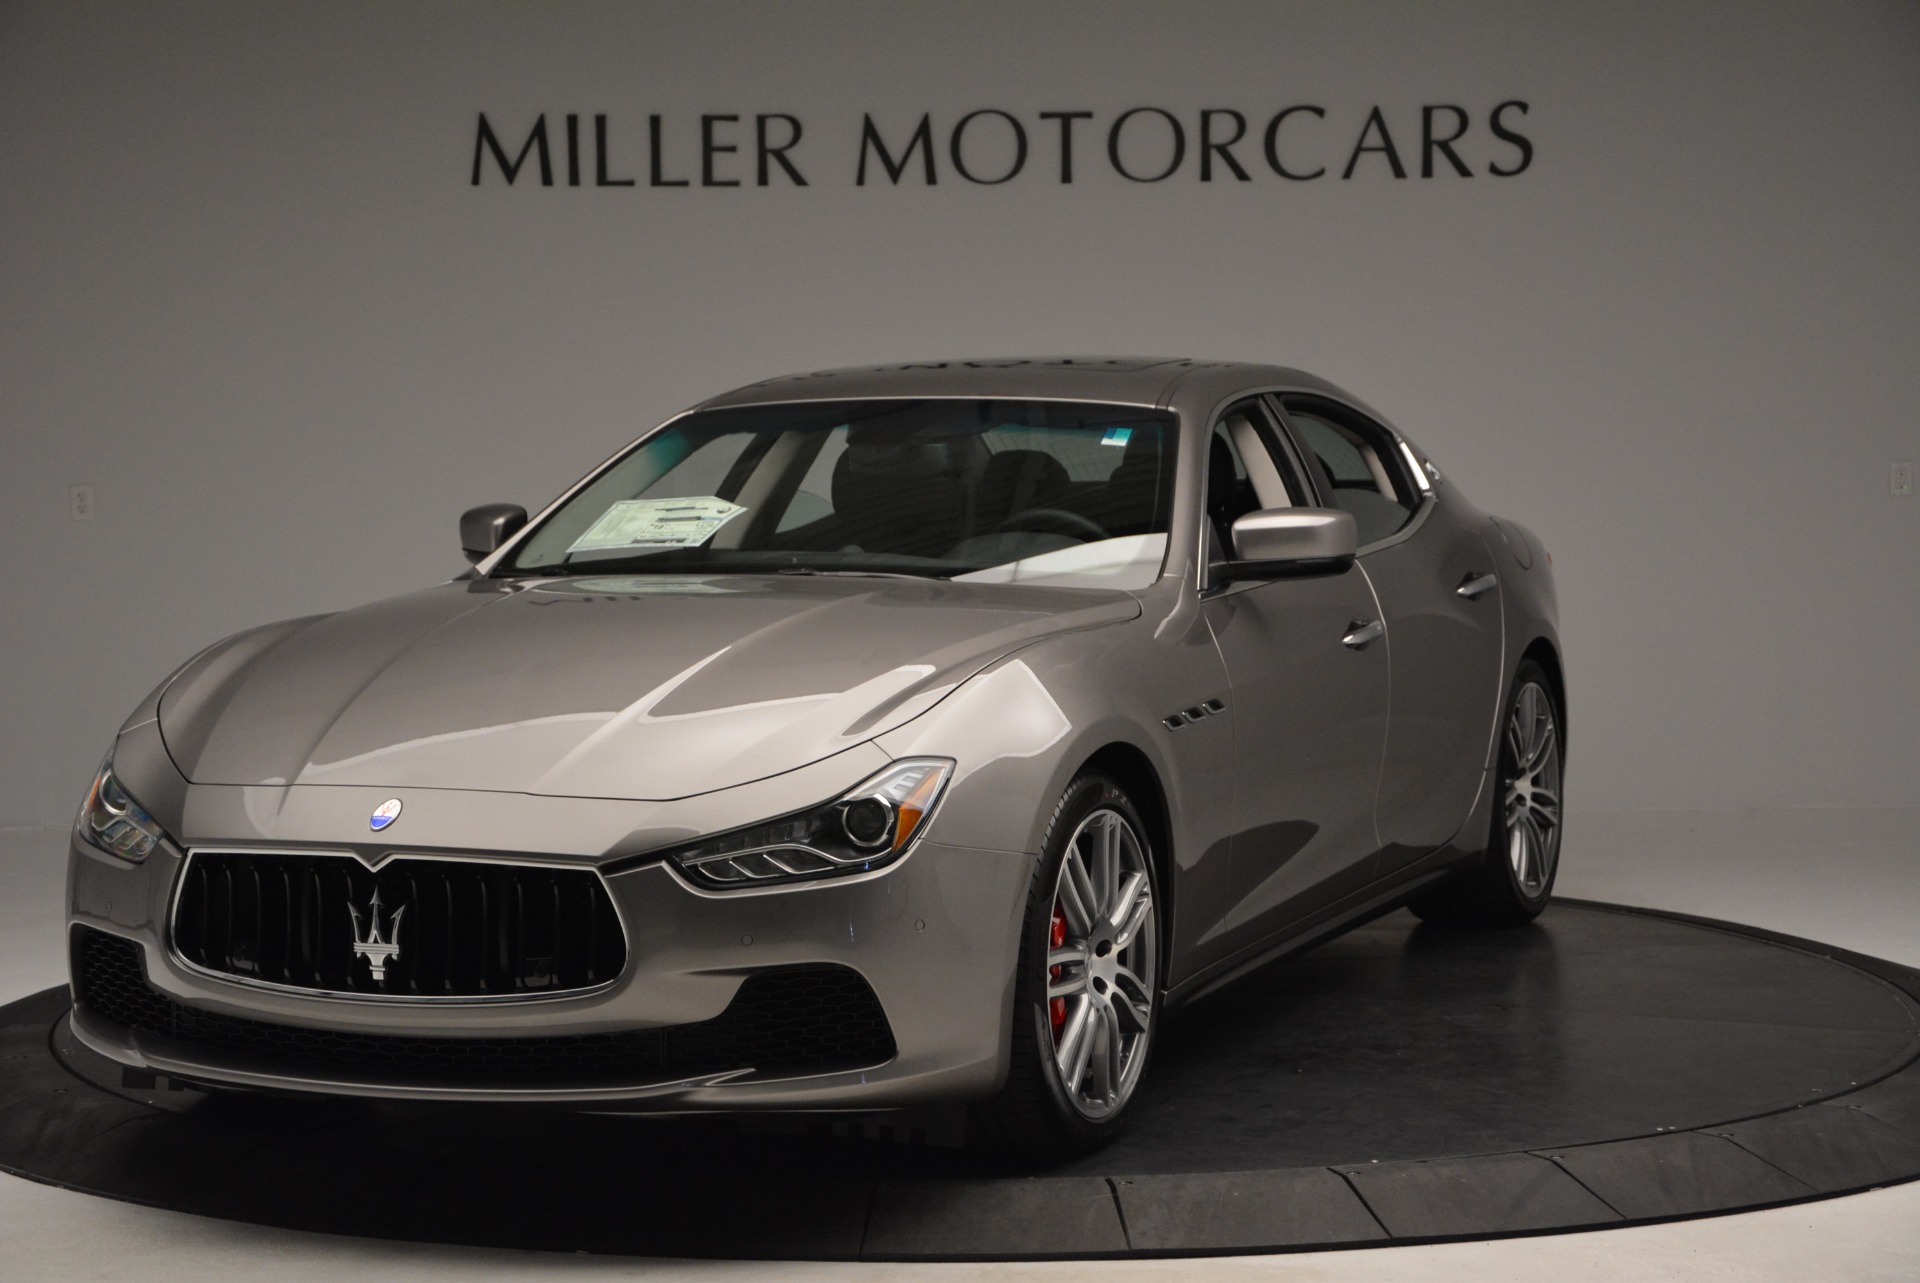 Used 2014 Maserati Ghibli S Q4 for sale Sold at McLaren Greenwich in Greenwich CT 06830 1